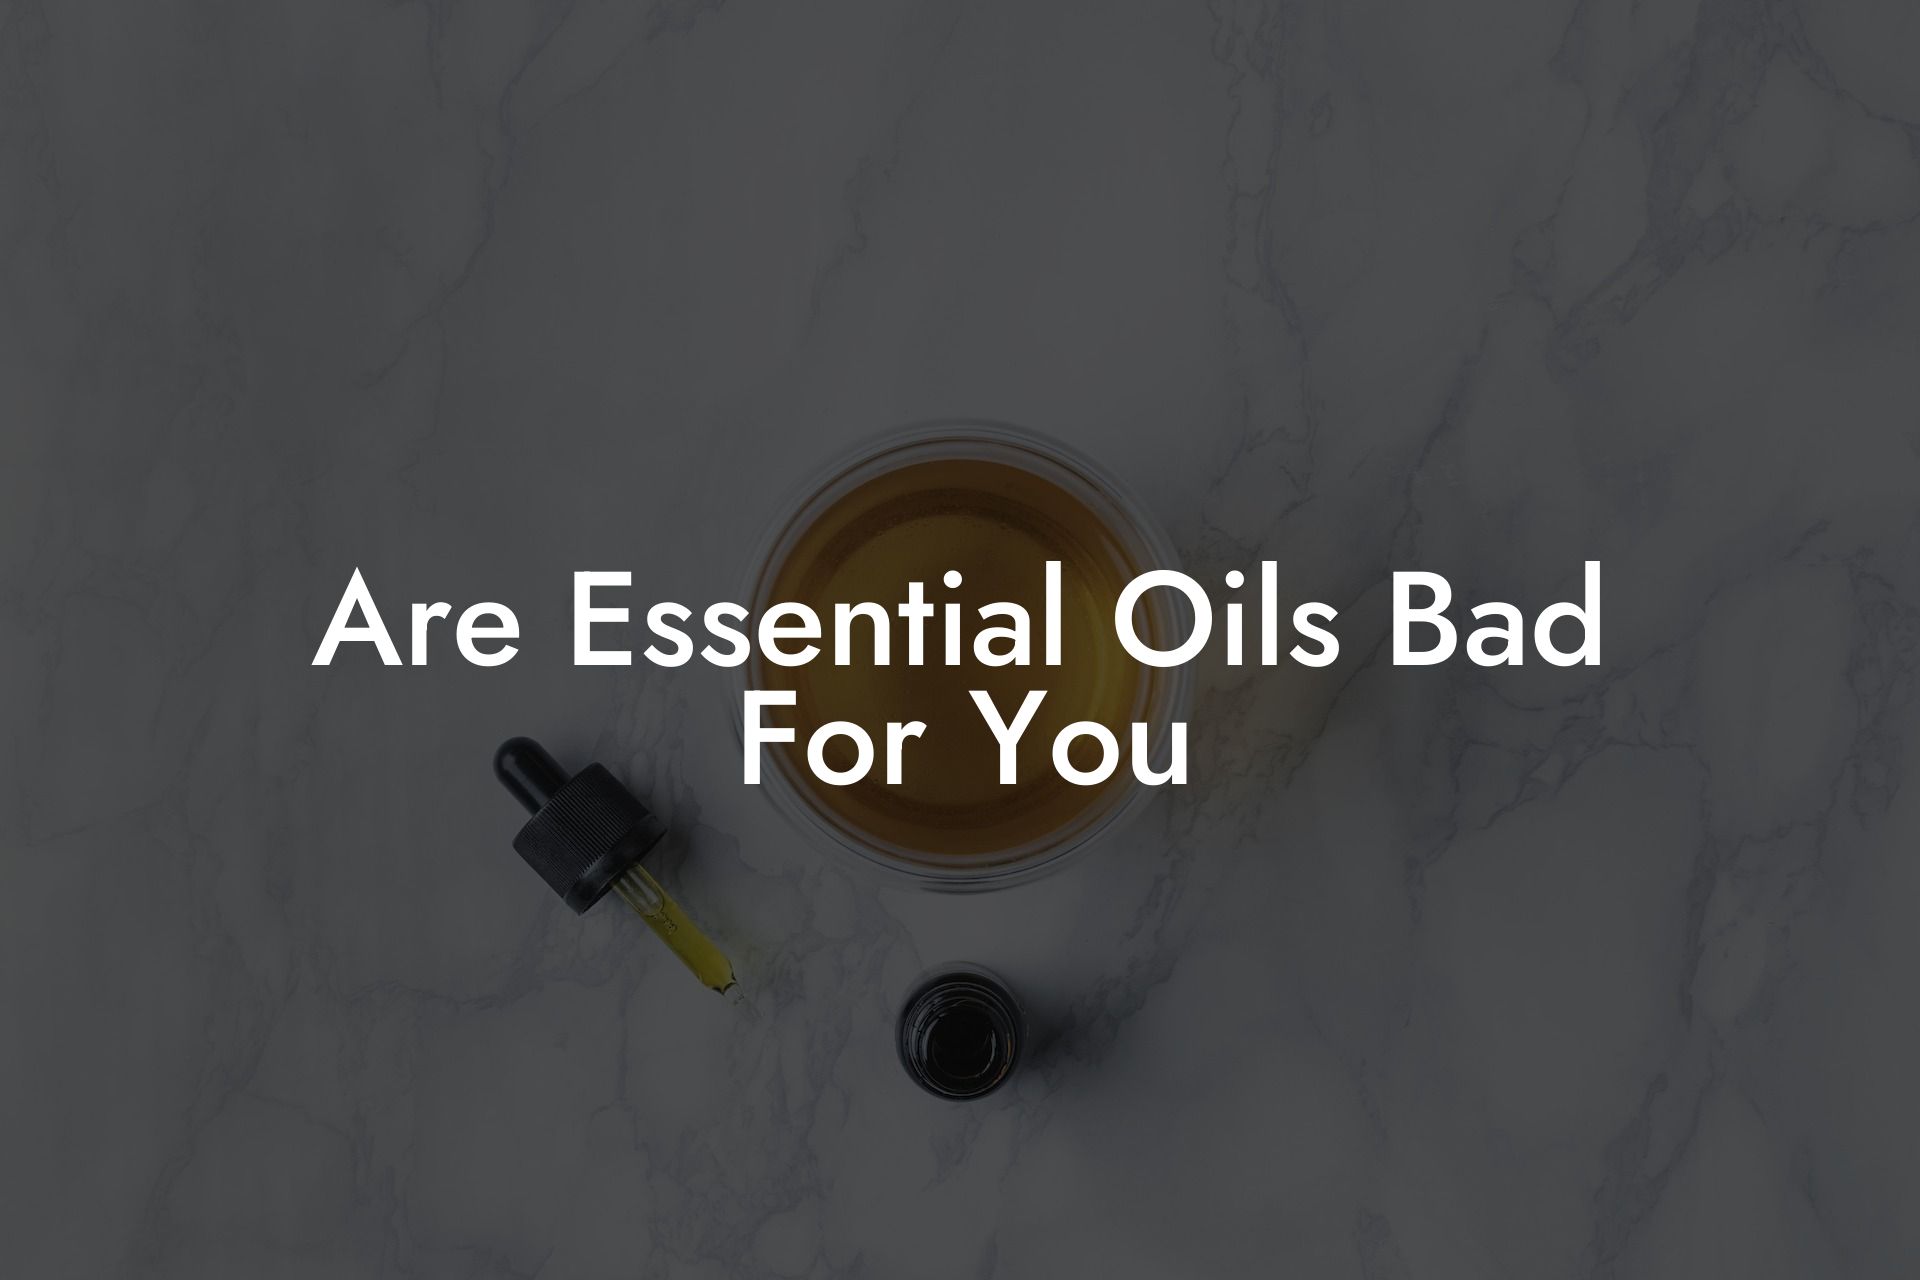 Are Essential Oils Bad For You